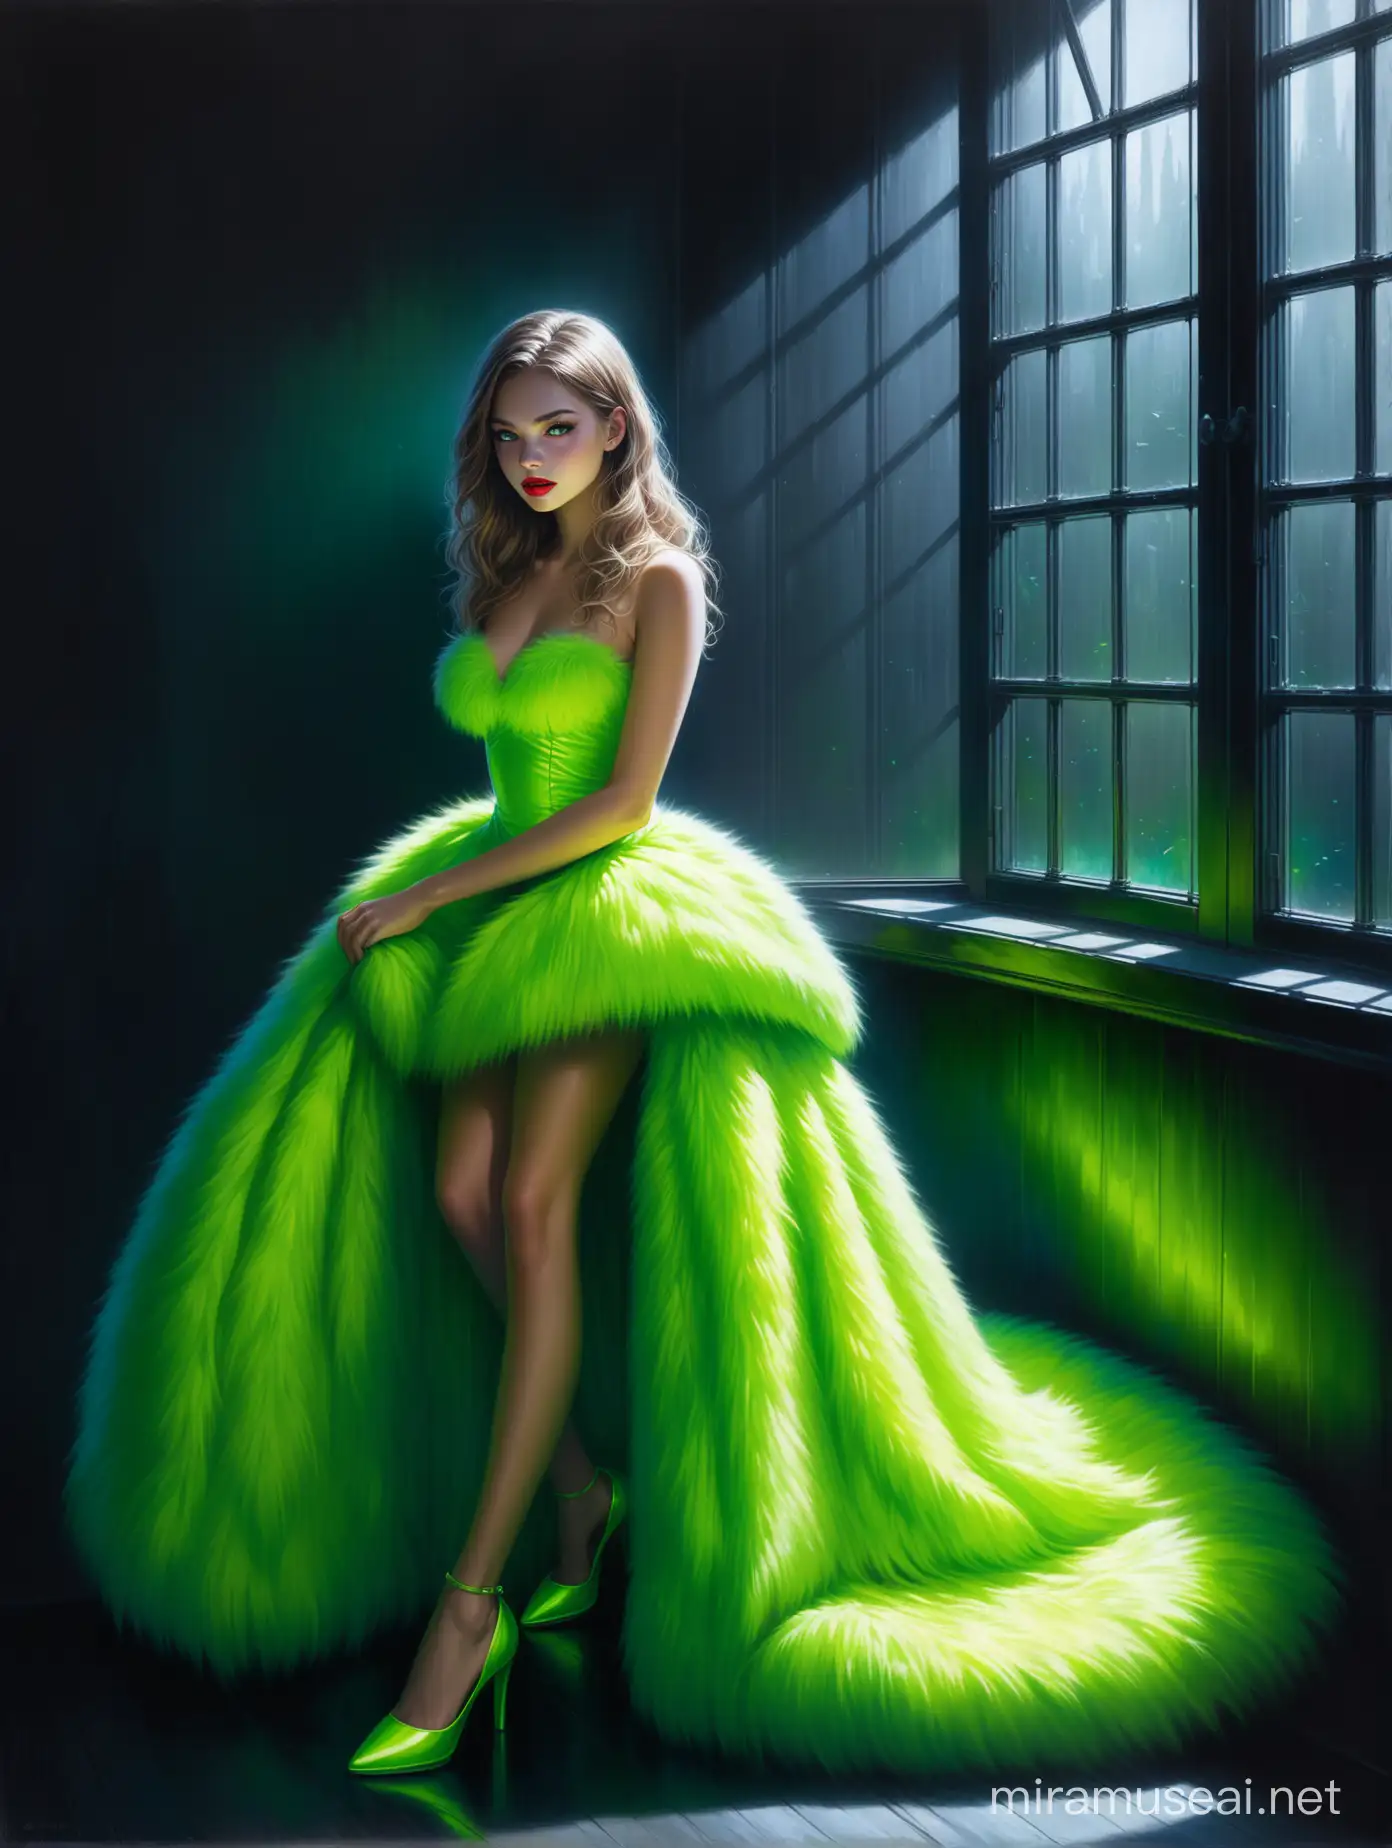 Aivision,digital art, oil painting, neon colors, full body of beautiful young women with dramatic expression, prety eyes , full red lips, she is wearing short fur dress like a princess in neon green color, she is wearing stunning heels. she looks out the window anxiously , dark environment and gloomy, image realistic, realistic facial features, Fairy Tail, Extremely detailed , intricate , beautiful , fantastic view , elegant , crispy quality Federico Bebber's expressive, amazing lighting 